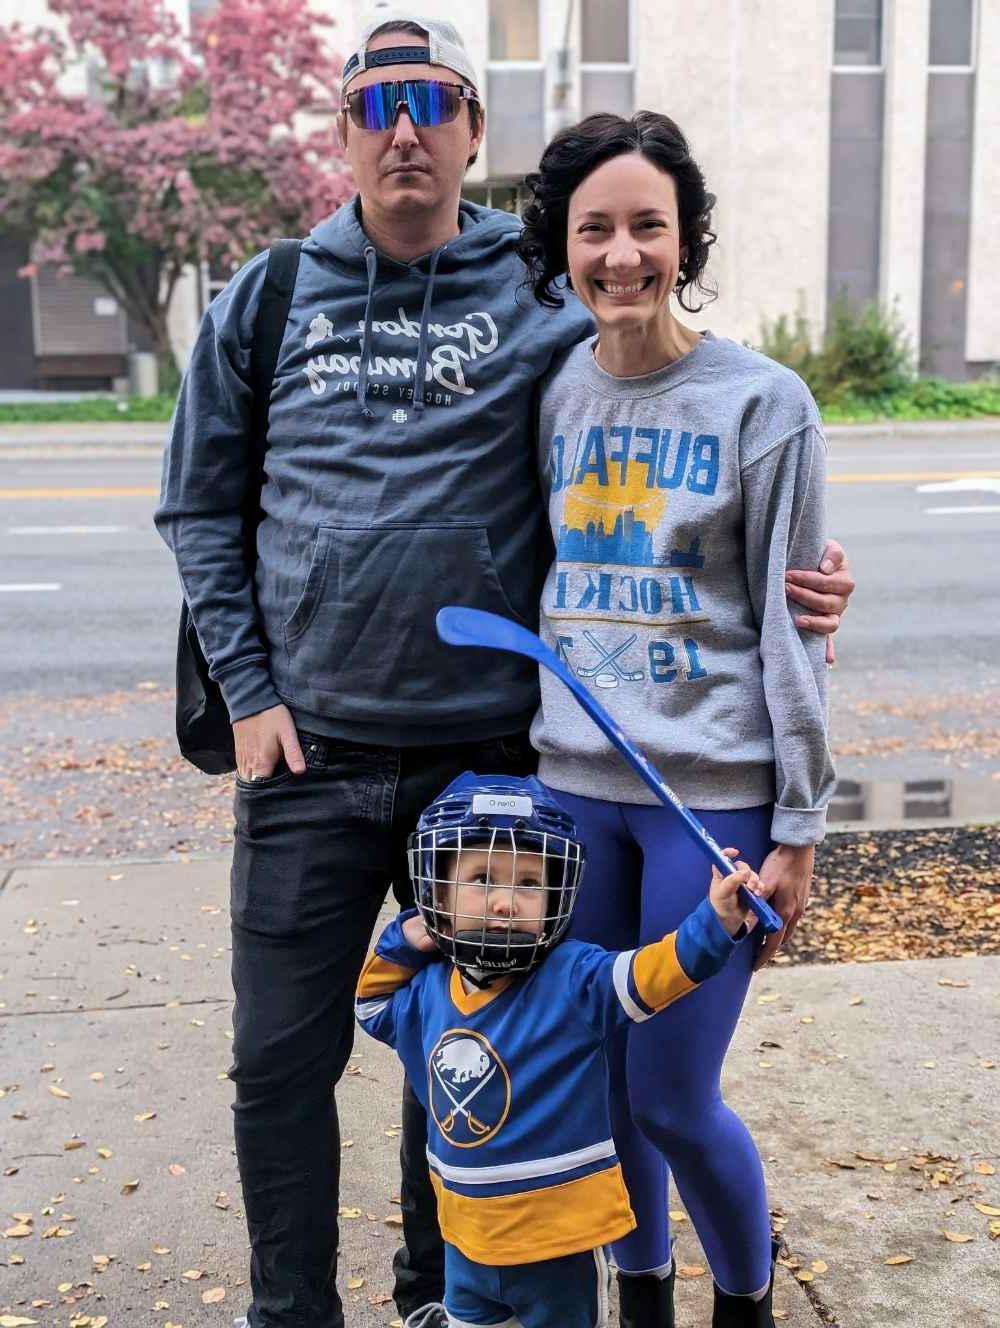 Mitch O'Connell with his partner pose with their two-year-old, who is sporting ice hockey gear.